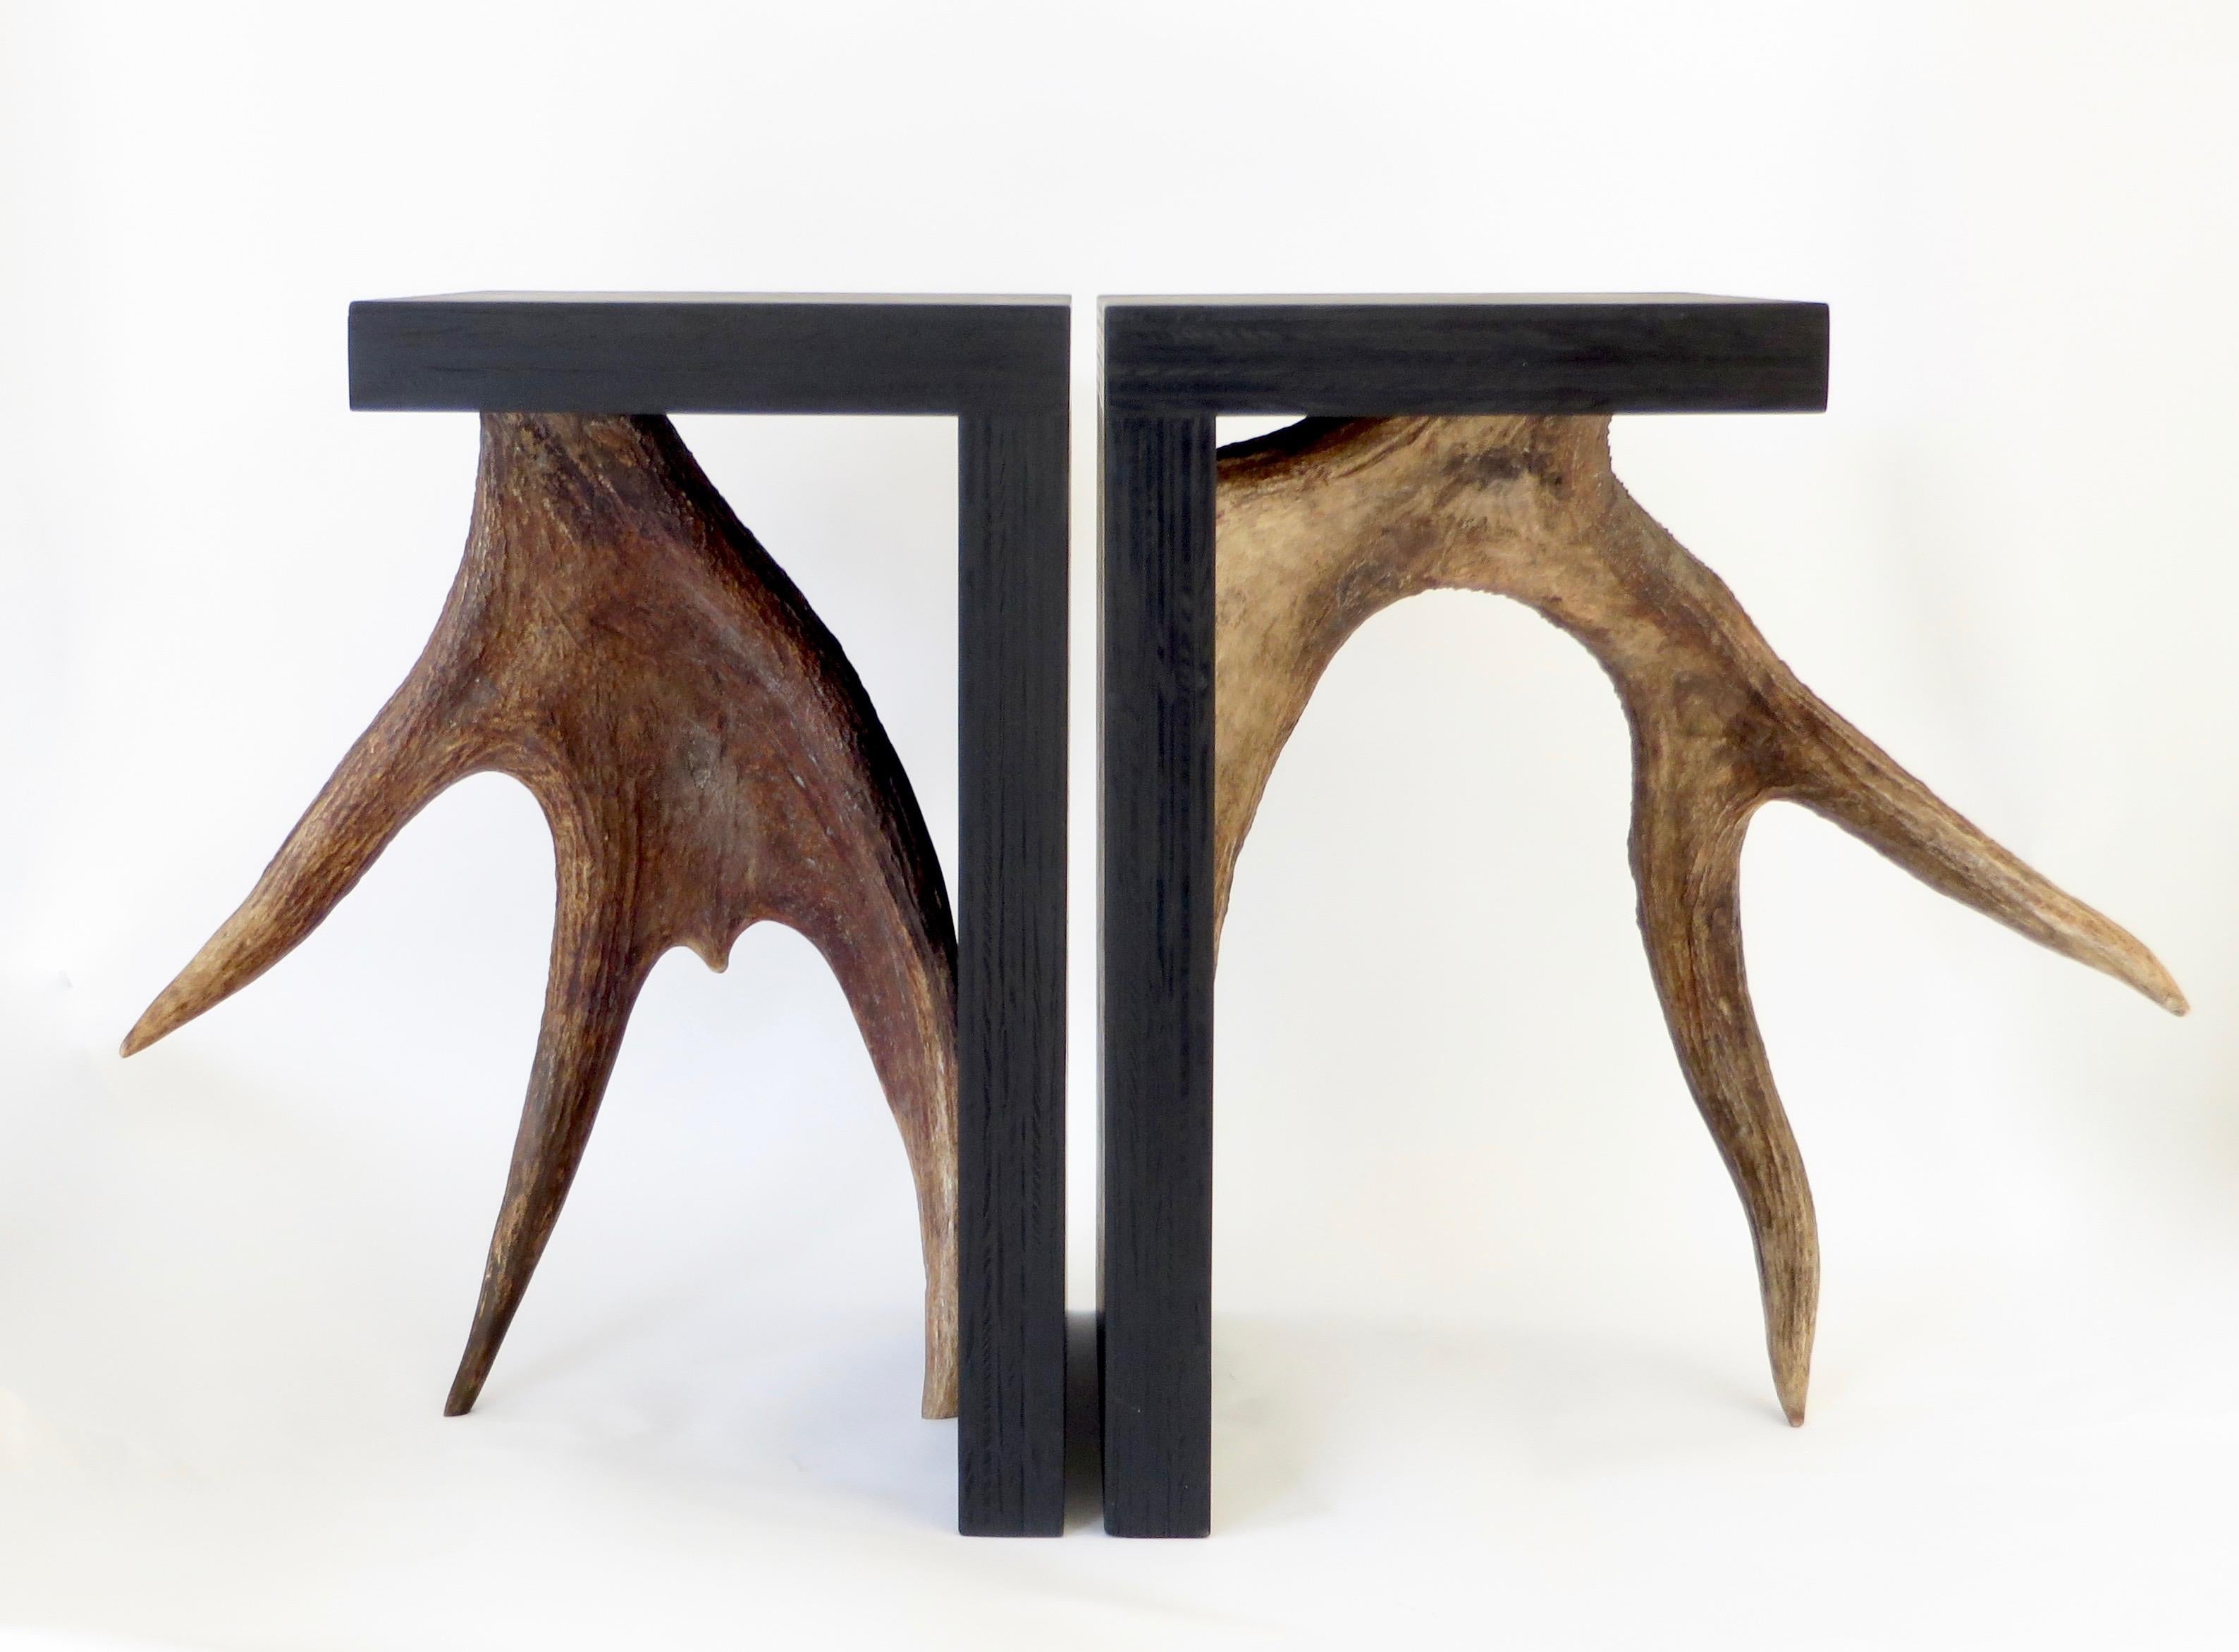 Plywood Rick Owens Stag T Stool in Black Stained Wood